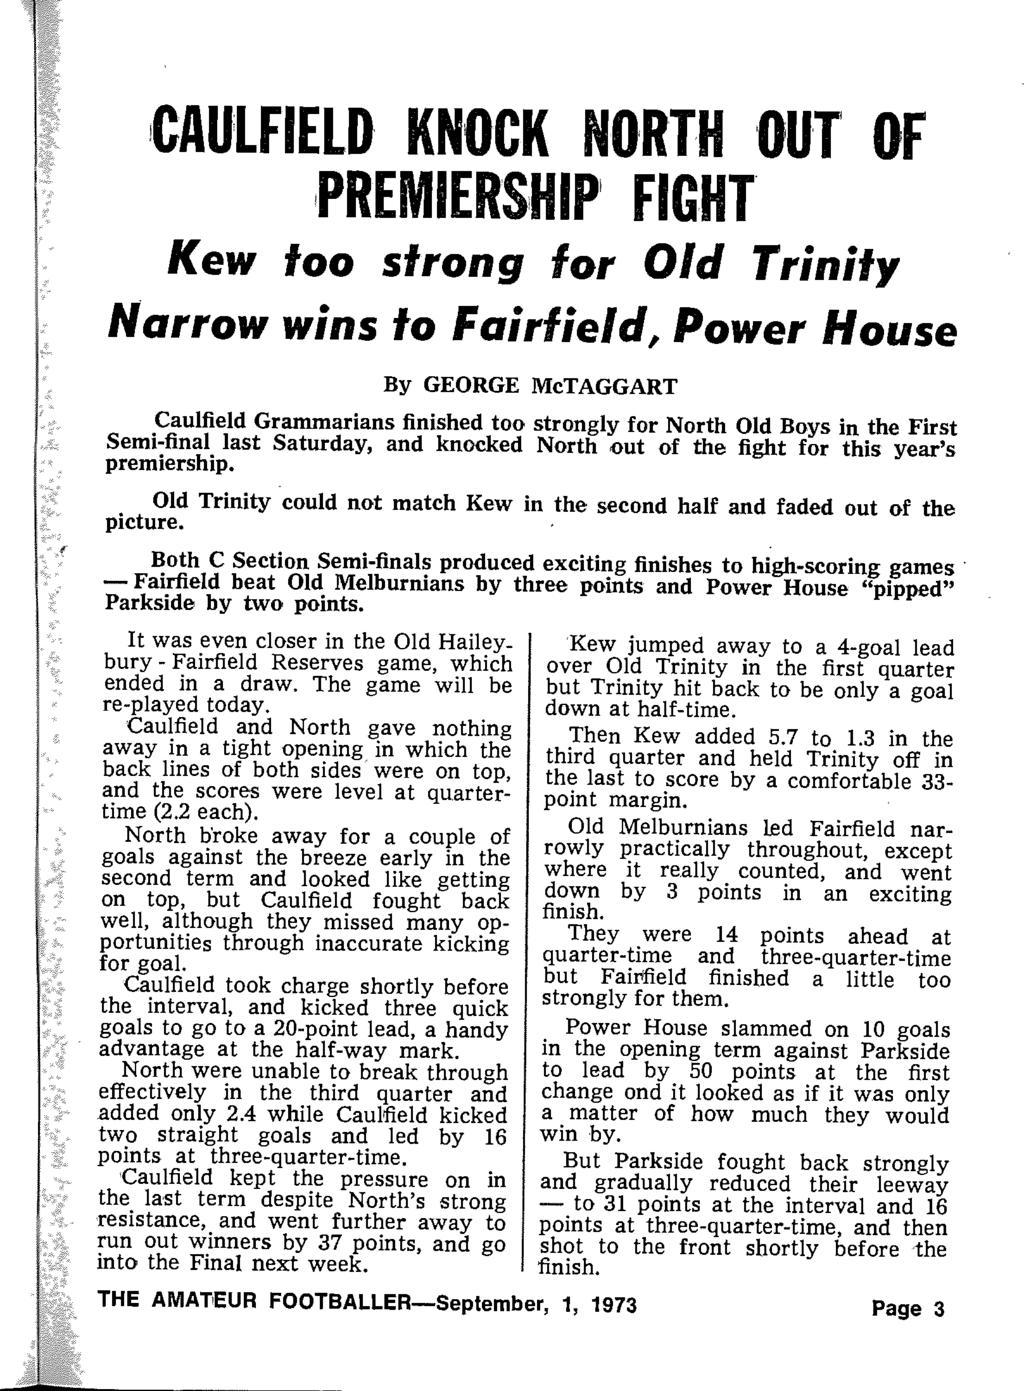 AWAULFIELD KNOCK NORTH OUT OF,PREM IERSHIP FIGHT Kew too strong for Old Trinity Narrow wins to Fairfield, Power House By GEORGE McTAGGART Caulfield Grammarians finished too strongly for North Old